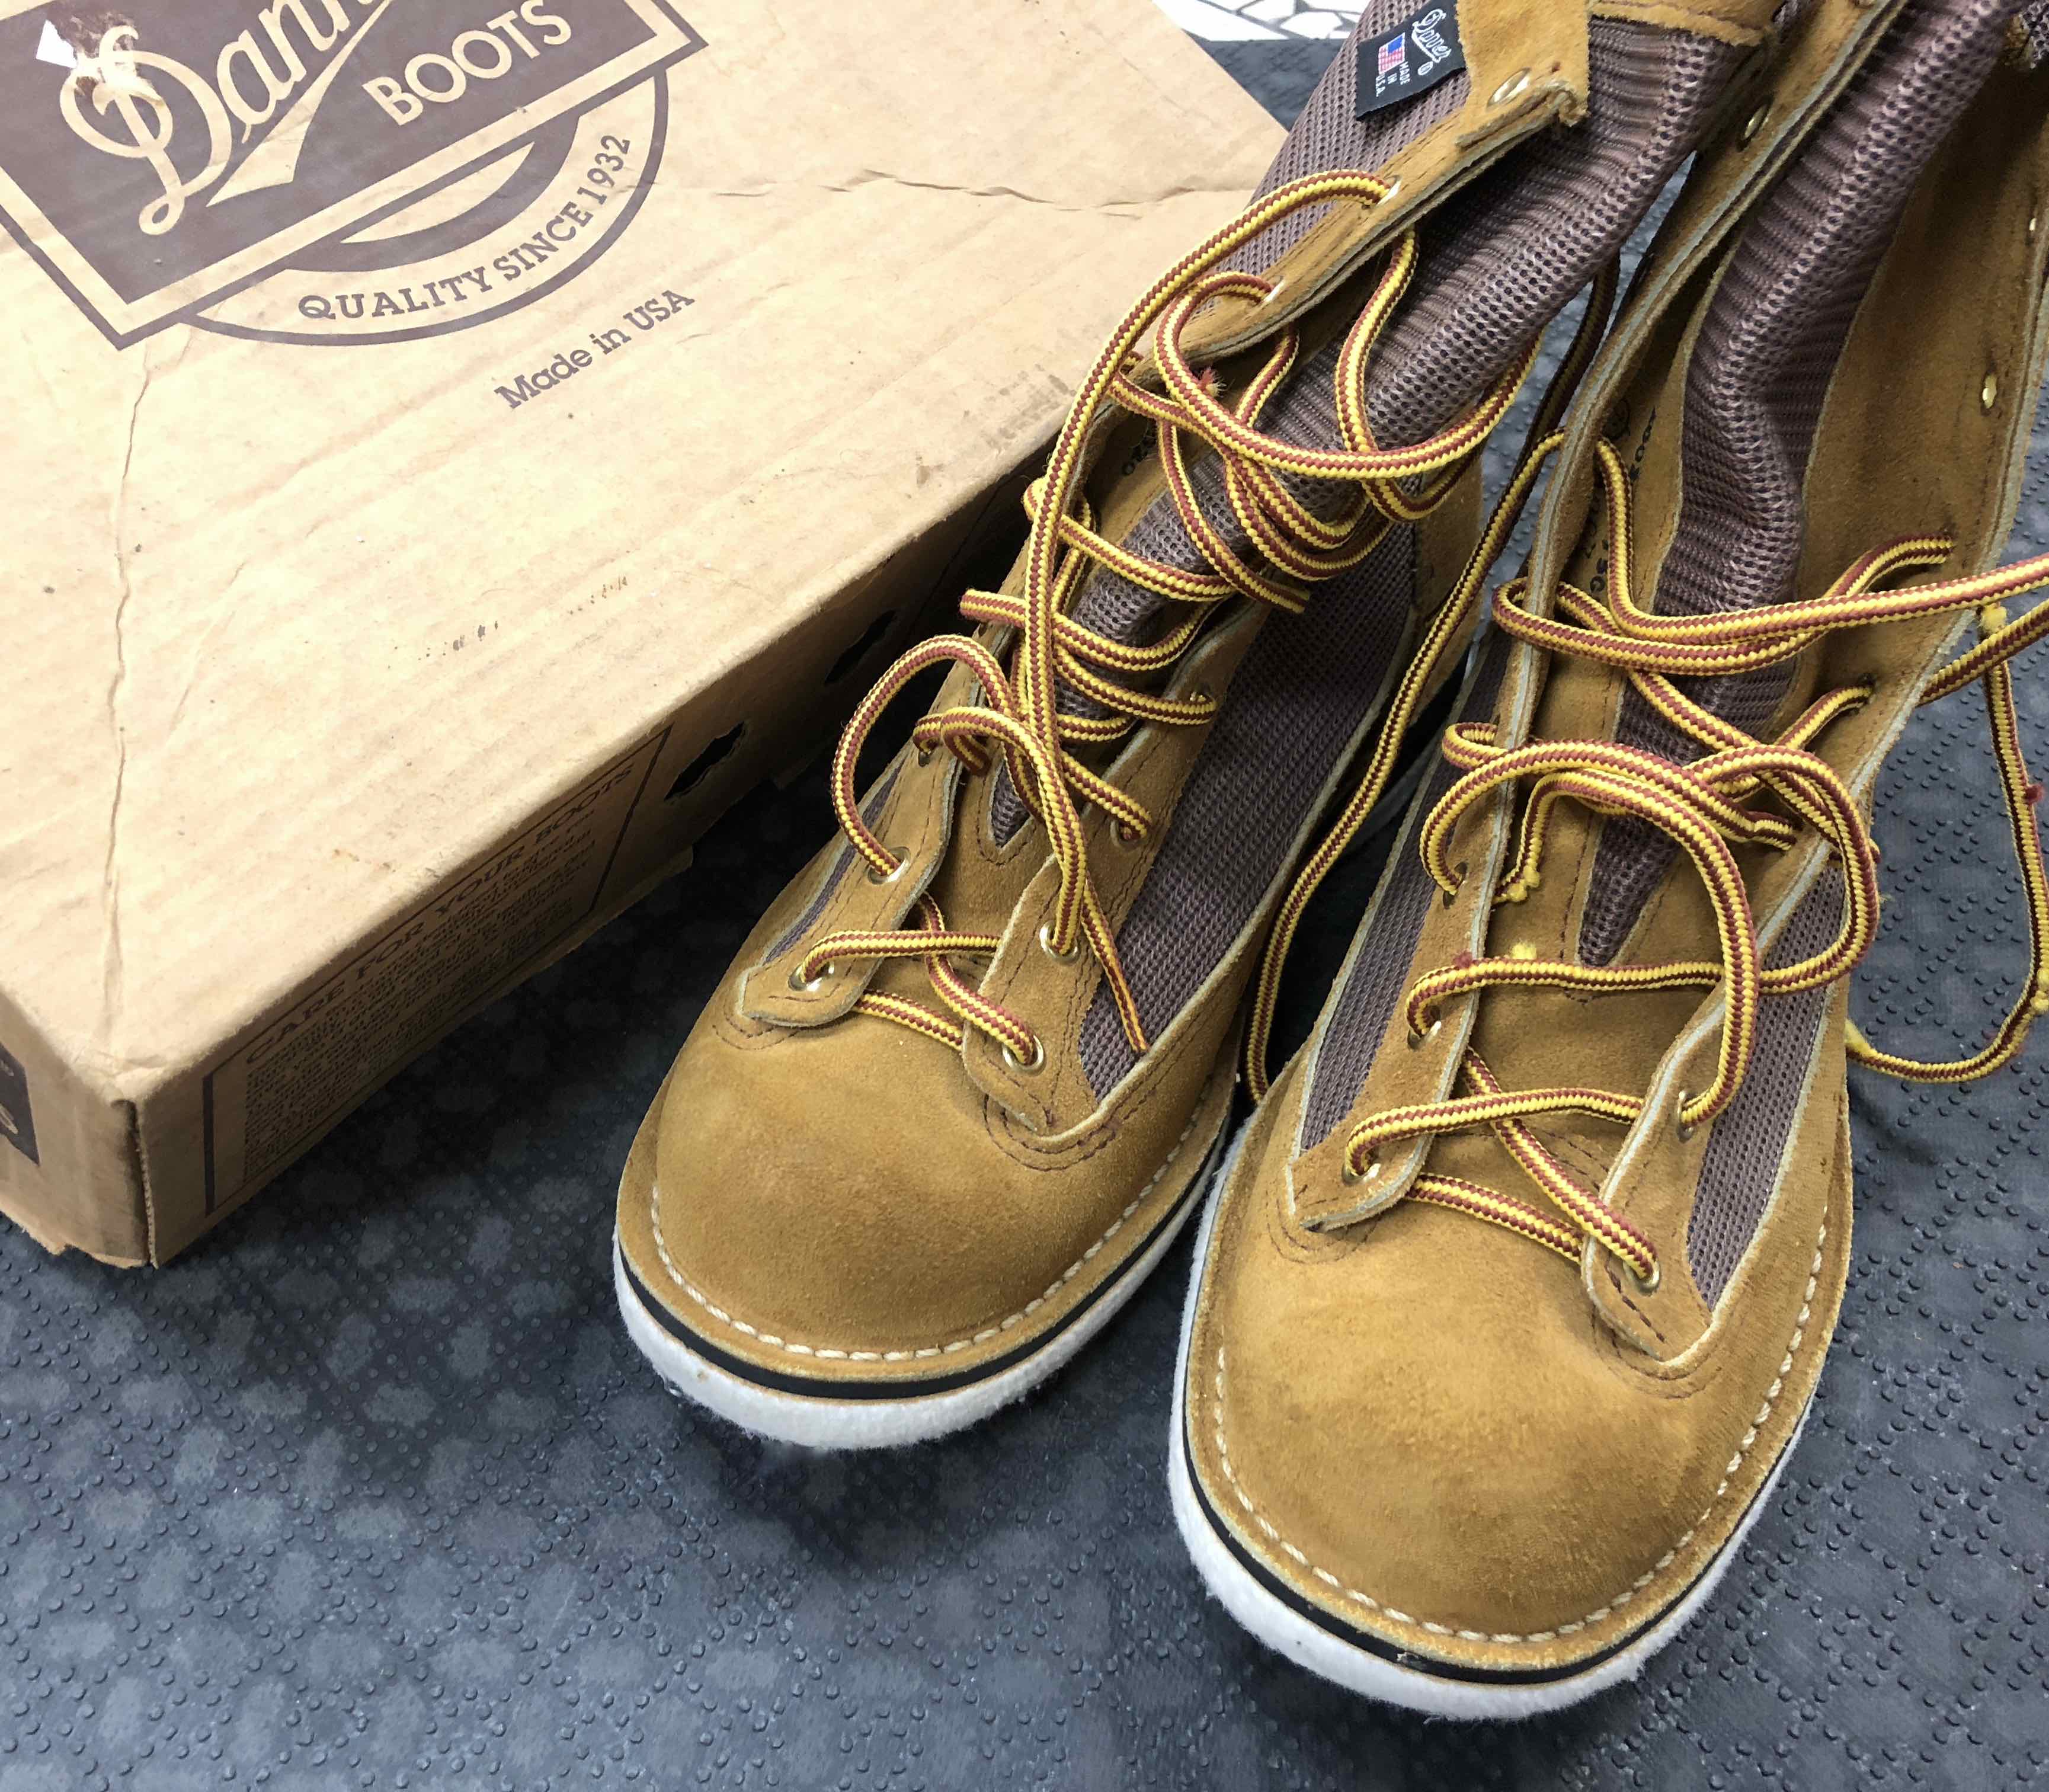 Danner Wading Boots - Size 9 - Felt Sole - NEVER USED! - $40